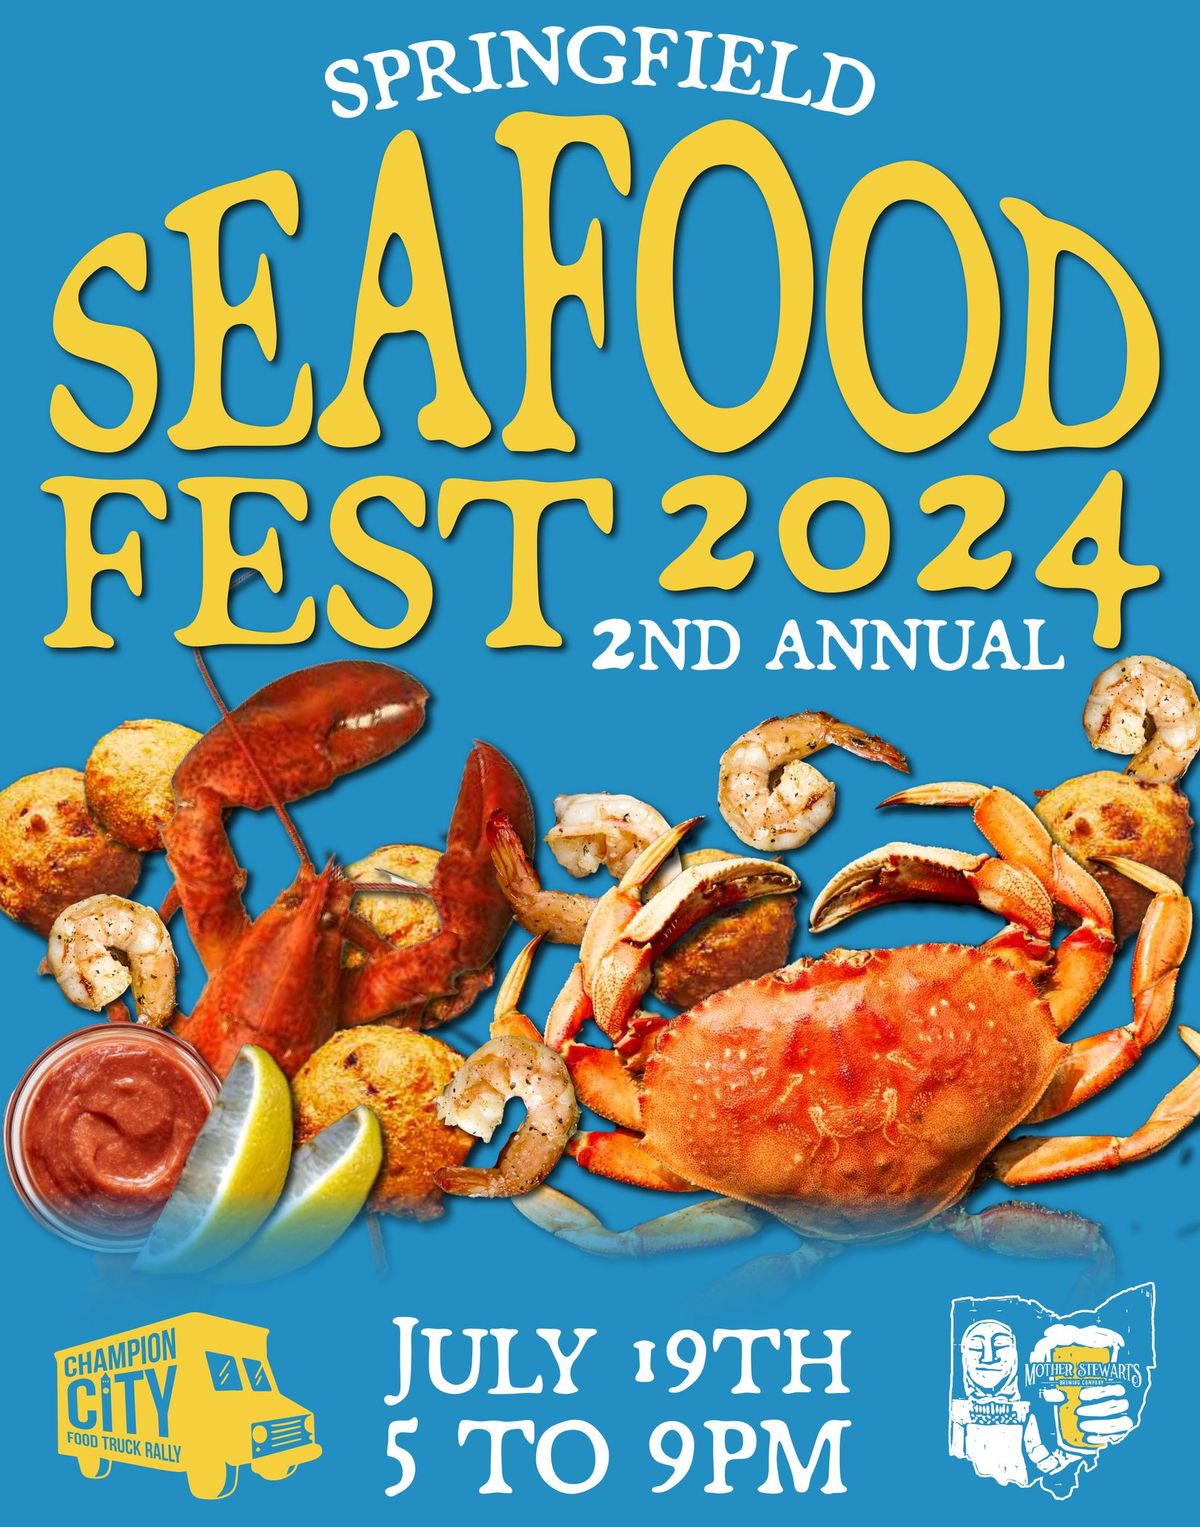 2nd Annual Springfield Seafood Fest - July 19th